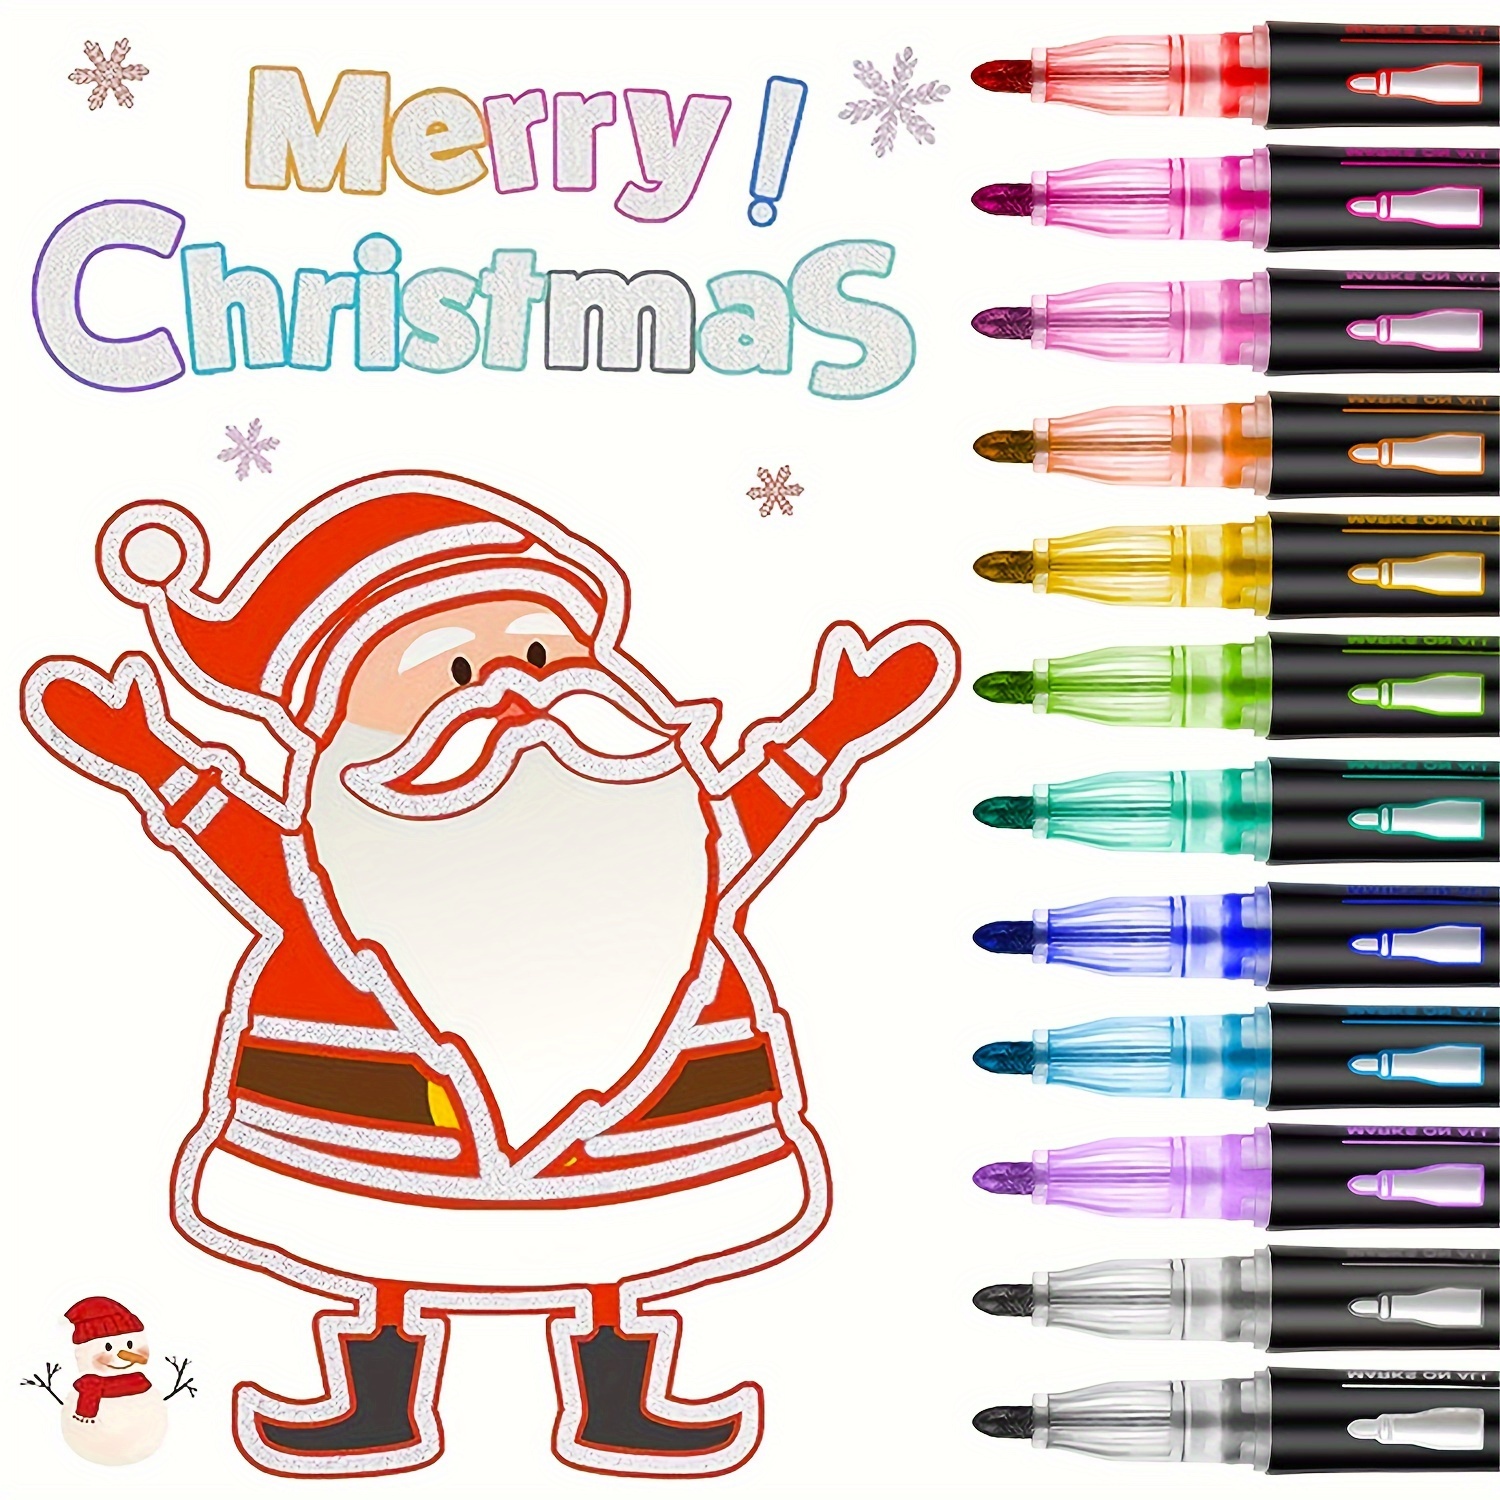 Shimmer Markers Doodle Outline Dazzles: 12 Colors Metallic Double Line  Glitter Pens Set Super Squiggles Sparkle Dazzlers Kid Age 4 8 Christmas  Gift Cool Fun Fancy Self Sparkly Supplies Art Craft Girl 